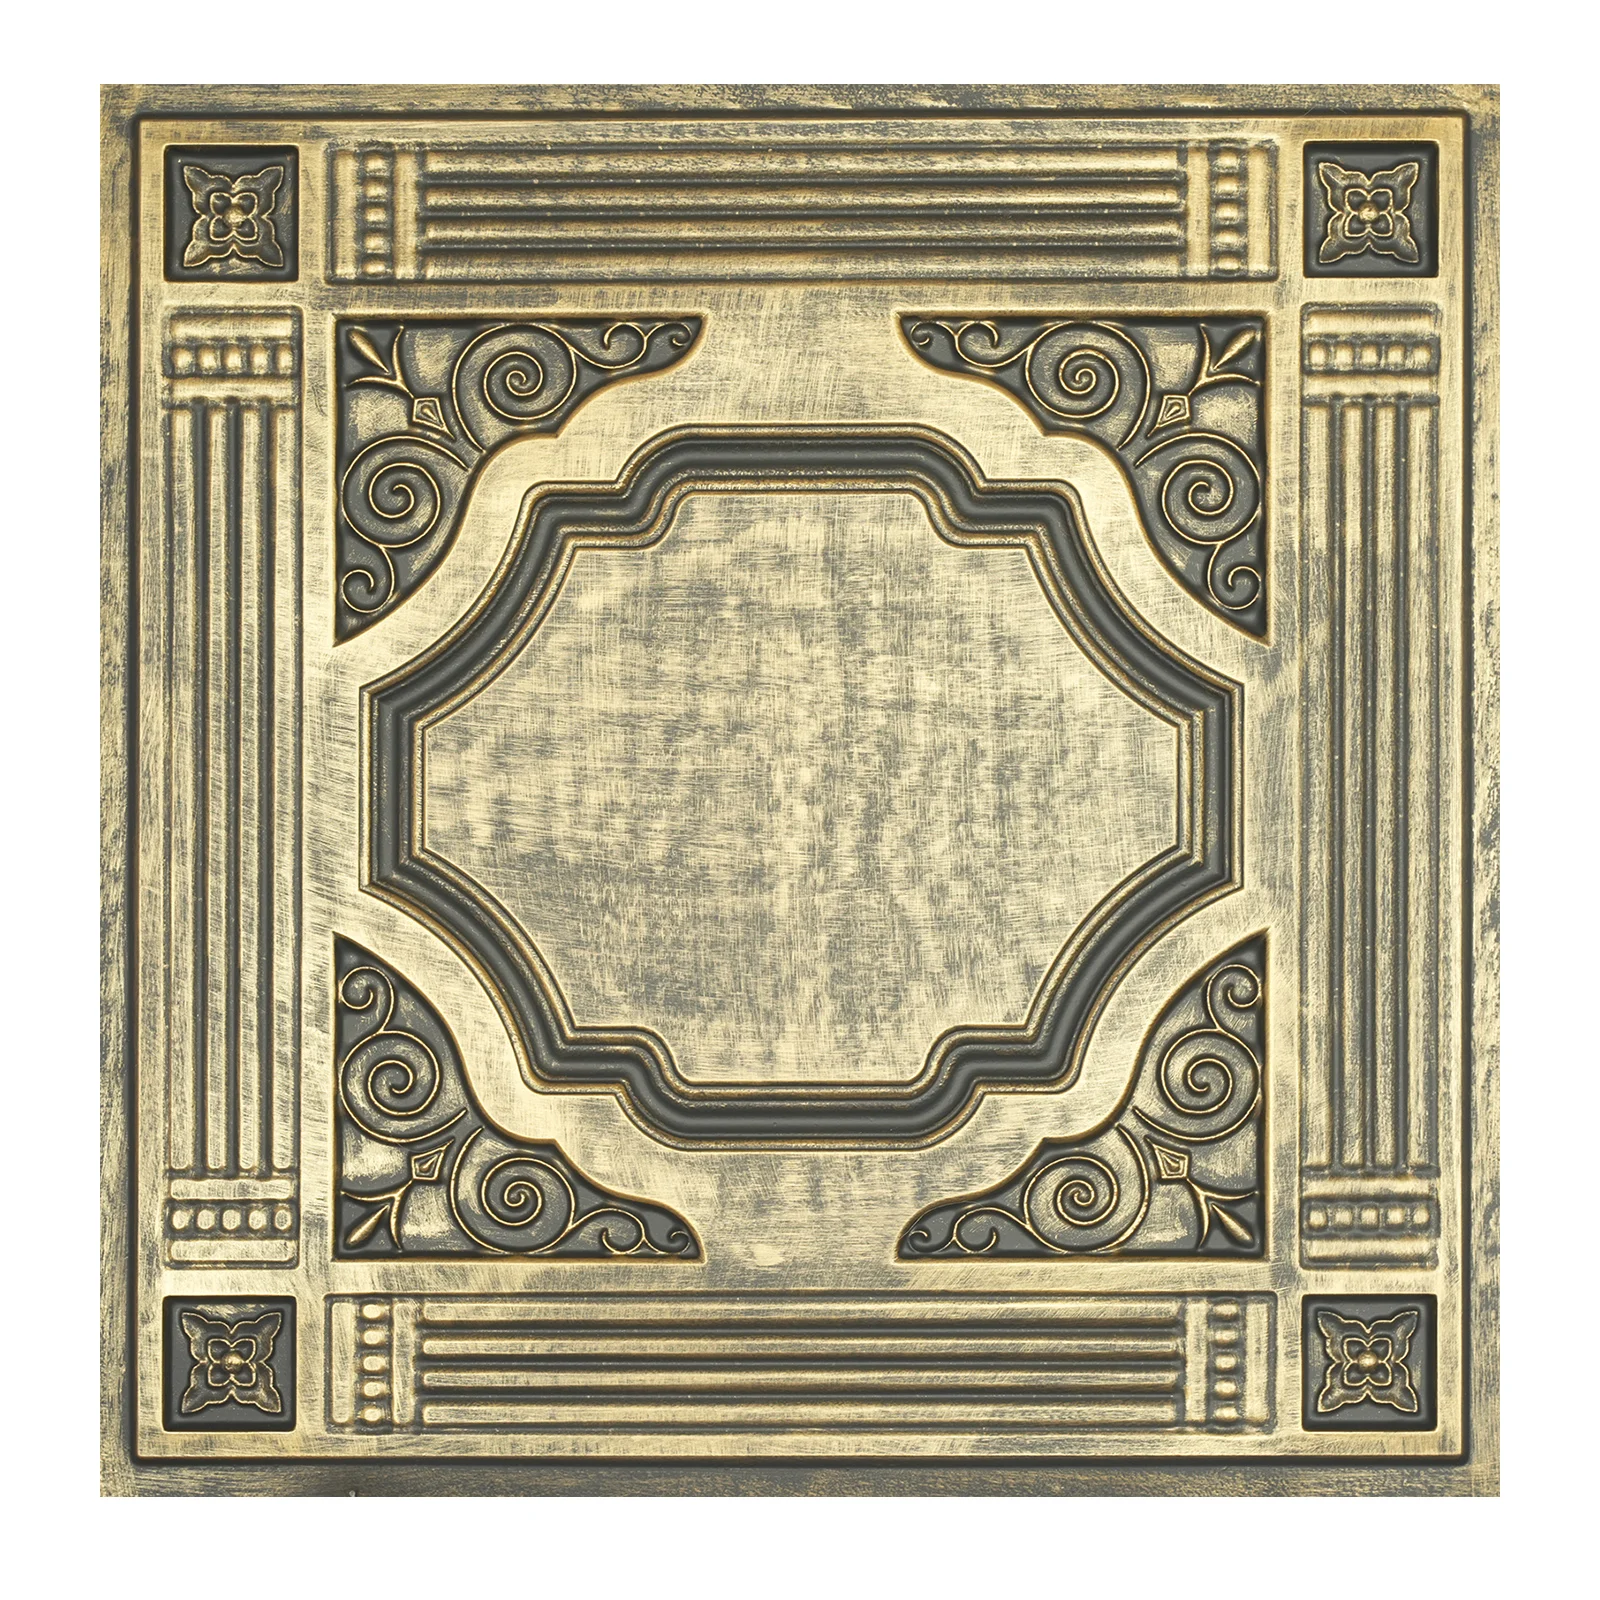 Decorative ceiling panels Artistic 3D ceiling tile Easy to Install PVC Panels Wall decor for Cafe Club PL65 Ancient gold